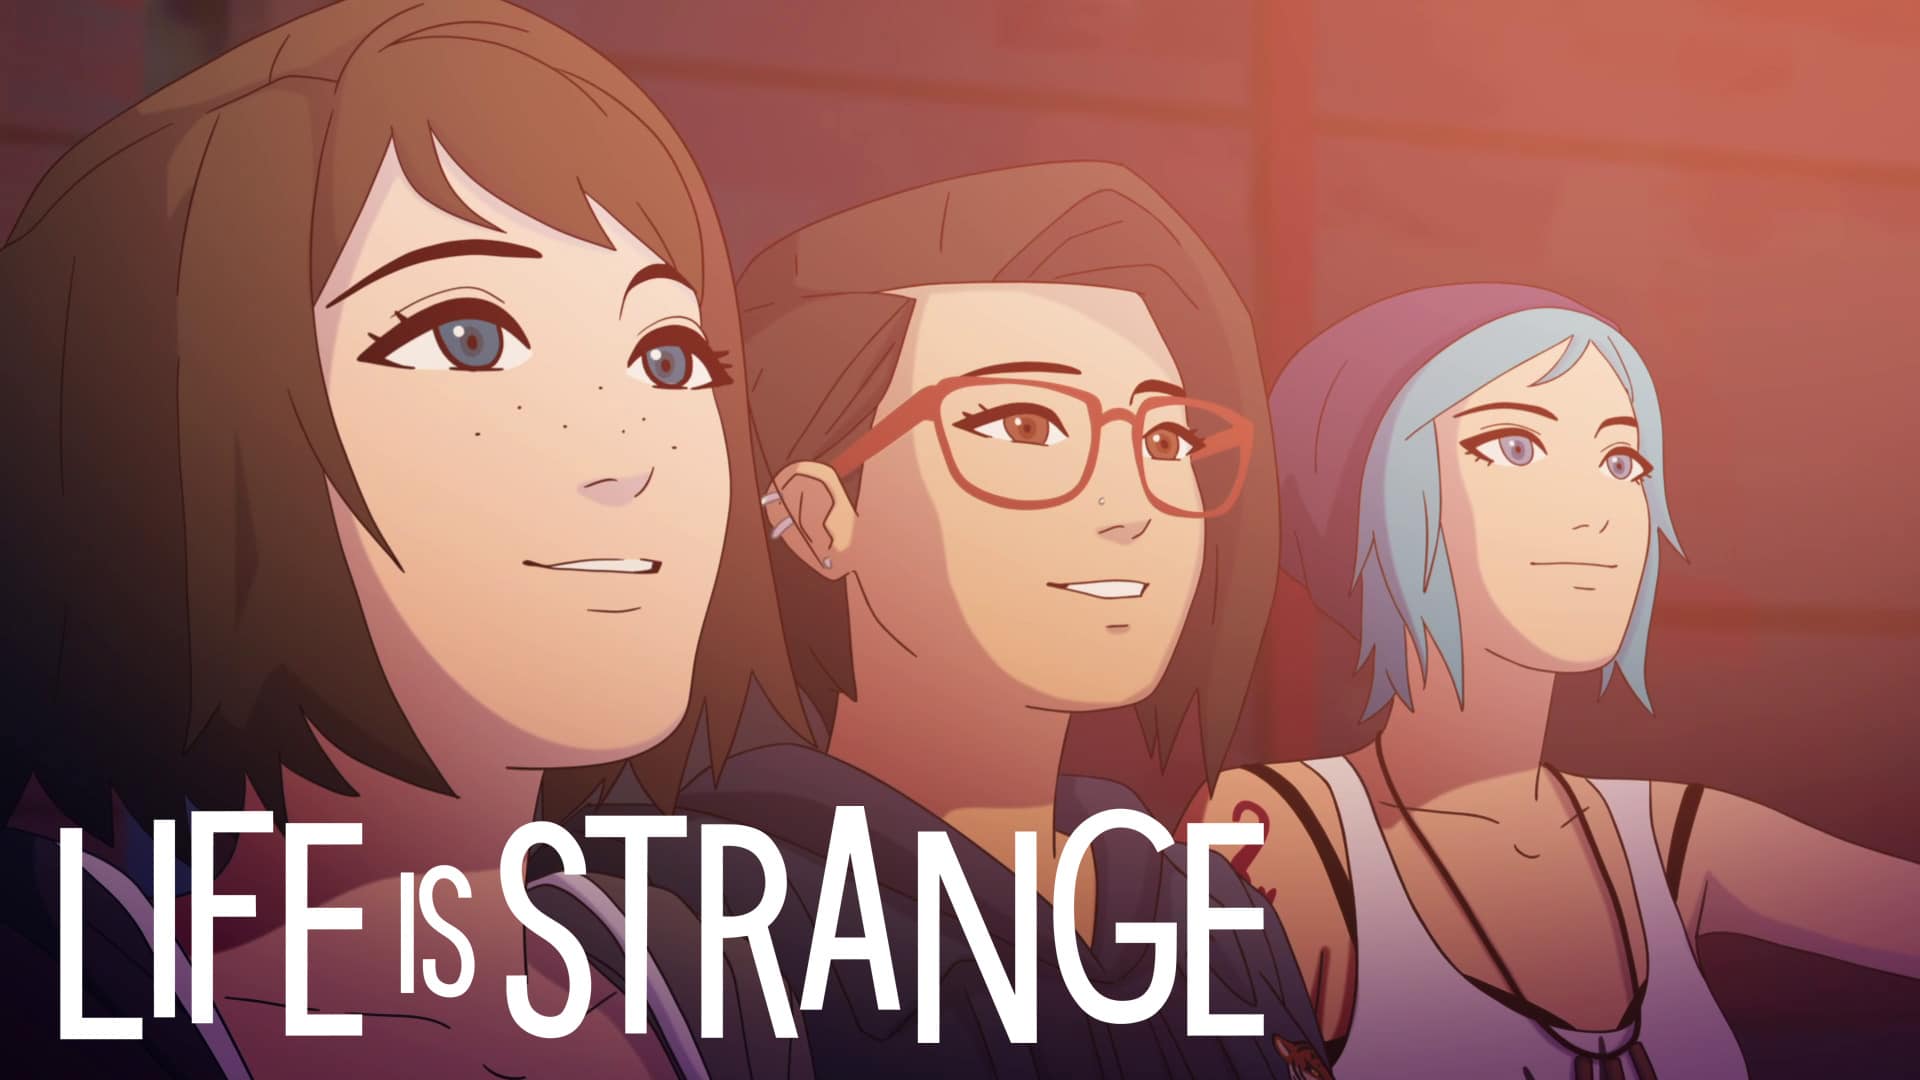 download free life is strange true colors switch